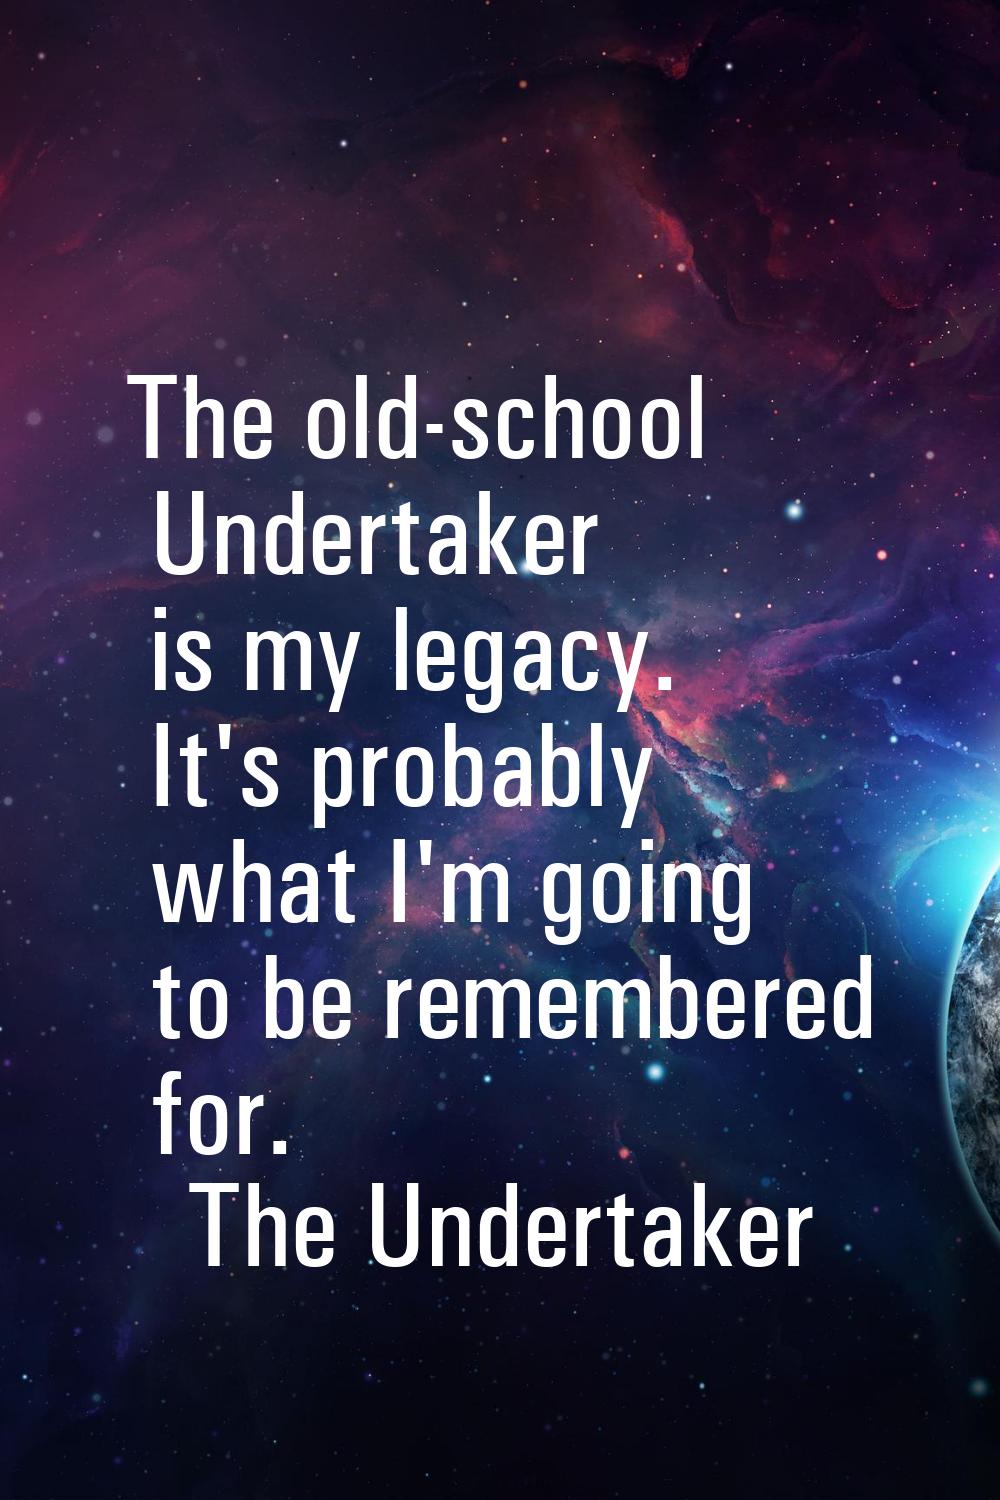 The old-school Undertaker is my legacy. It's probably what I'm going to be remembered for.